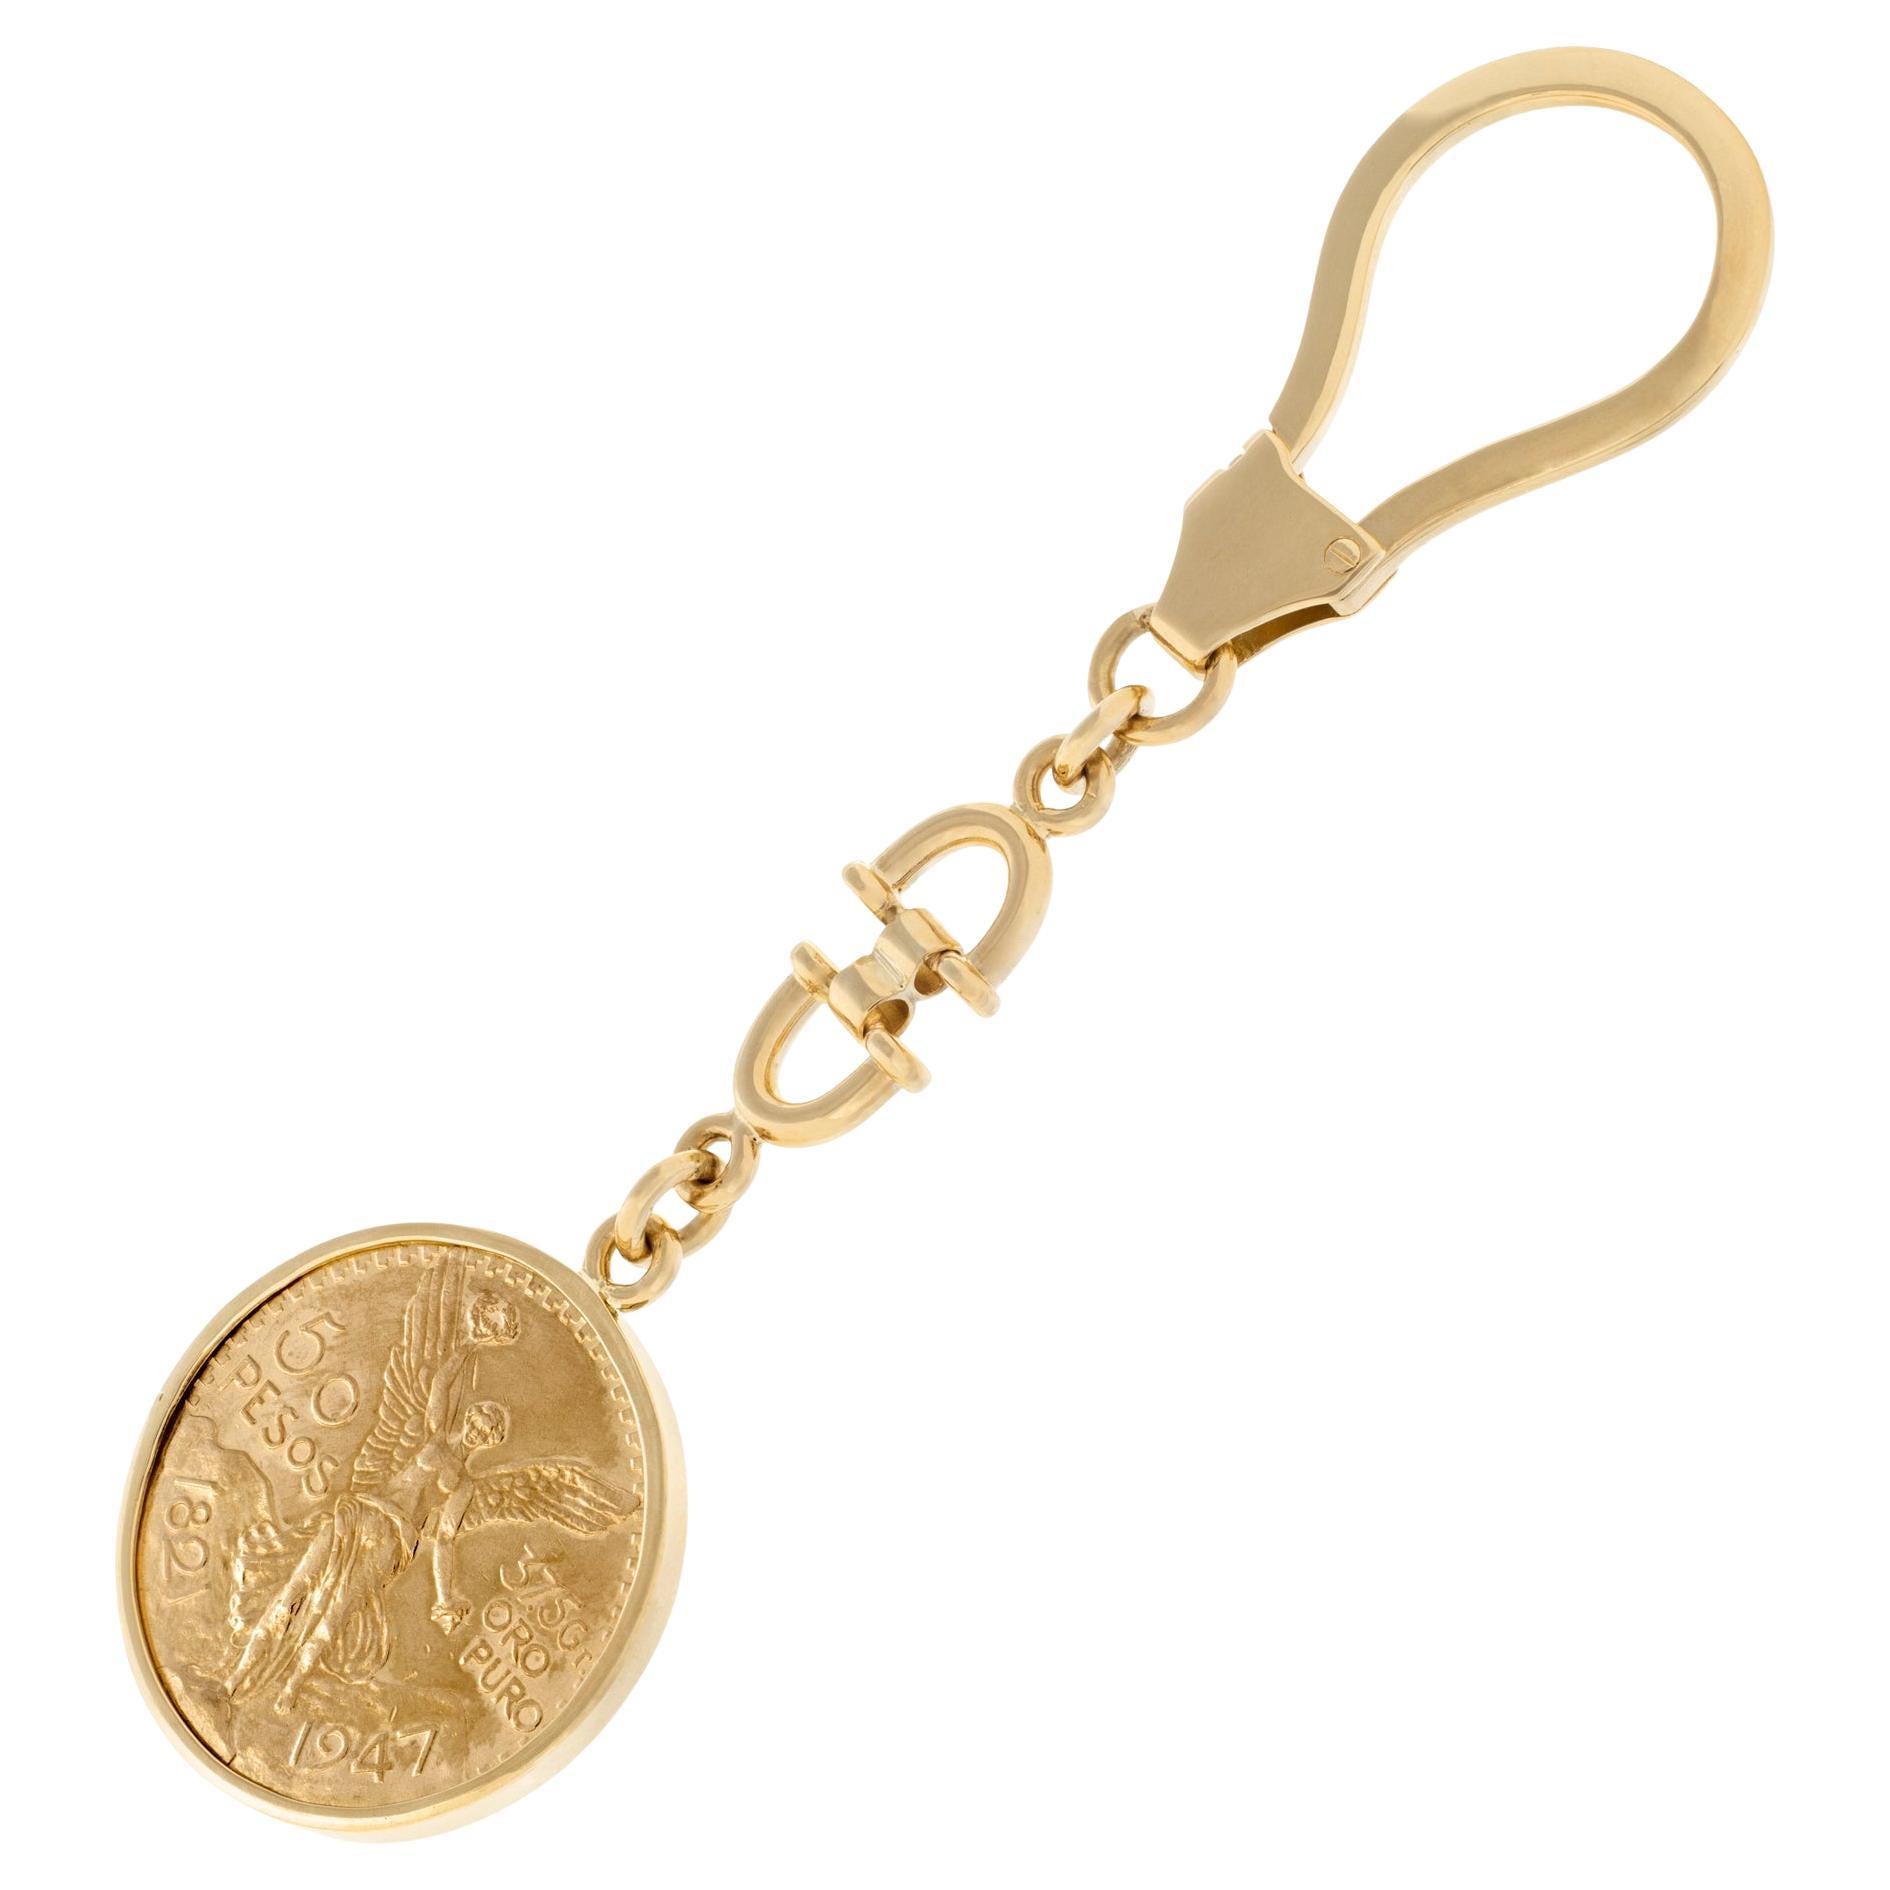 18k gold 50 Pesos Mexican Coin Keychain